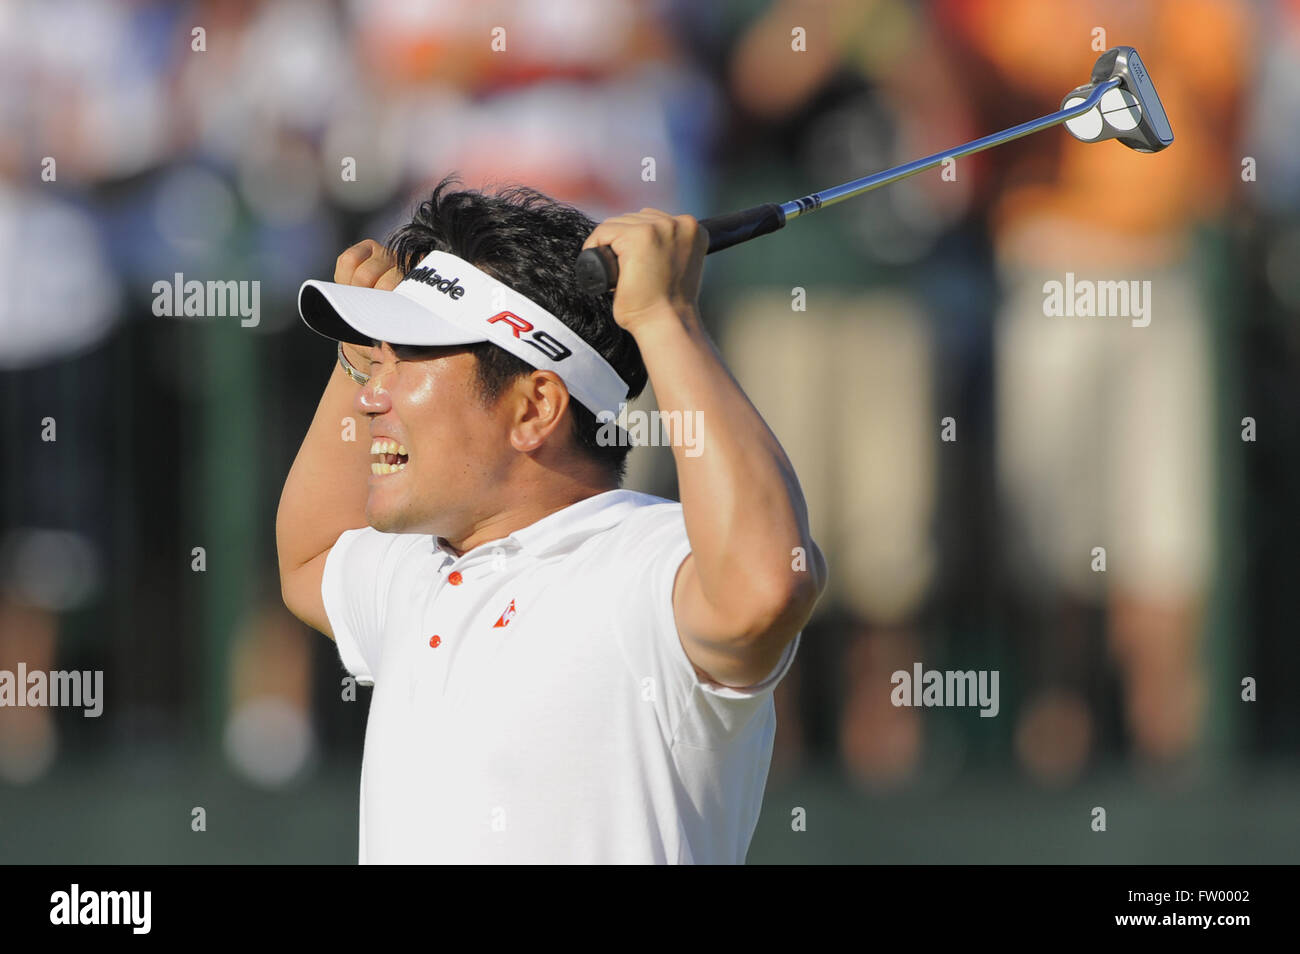 Chaska, MN, UNITED STATES. 16th Aug, 2009. Y.E. Yang of Korea, left, celebrates after making a birdie putt on the 18th green to win the 2009 PGA Championship as Tiger Woods (USA), right, looks down at his ball at Hazeltine National Golf Club on Aug 16, 2009 in Chaska, MN.ZUMA Press/Scott A. Miller © Scott A. Miller/ZUMA Wire/Alamy Live News Stock Photo